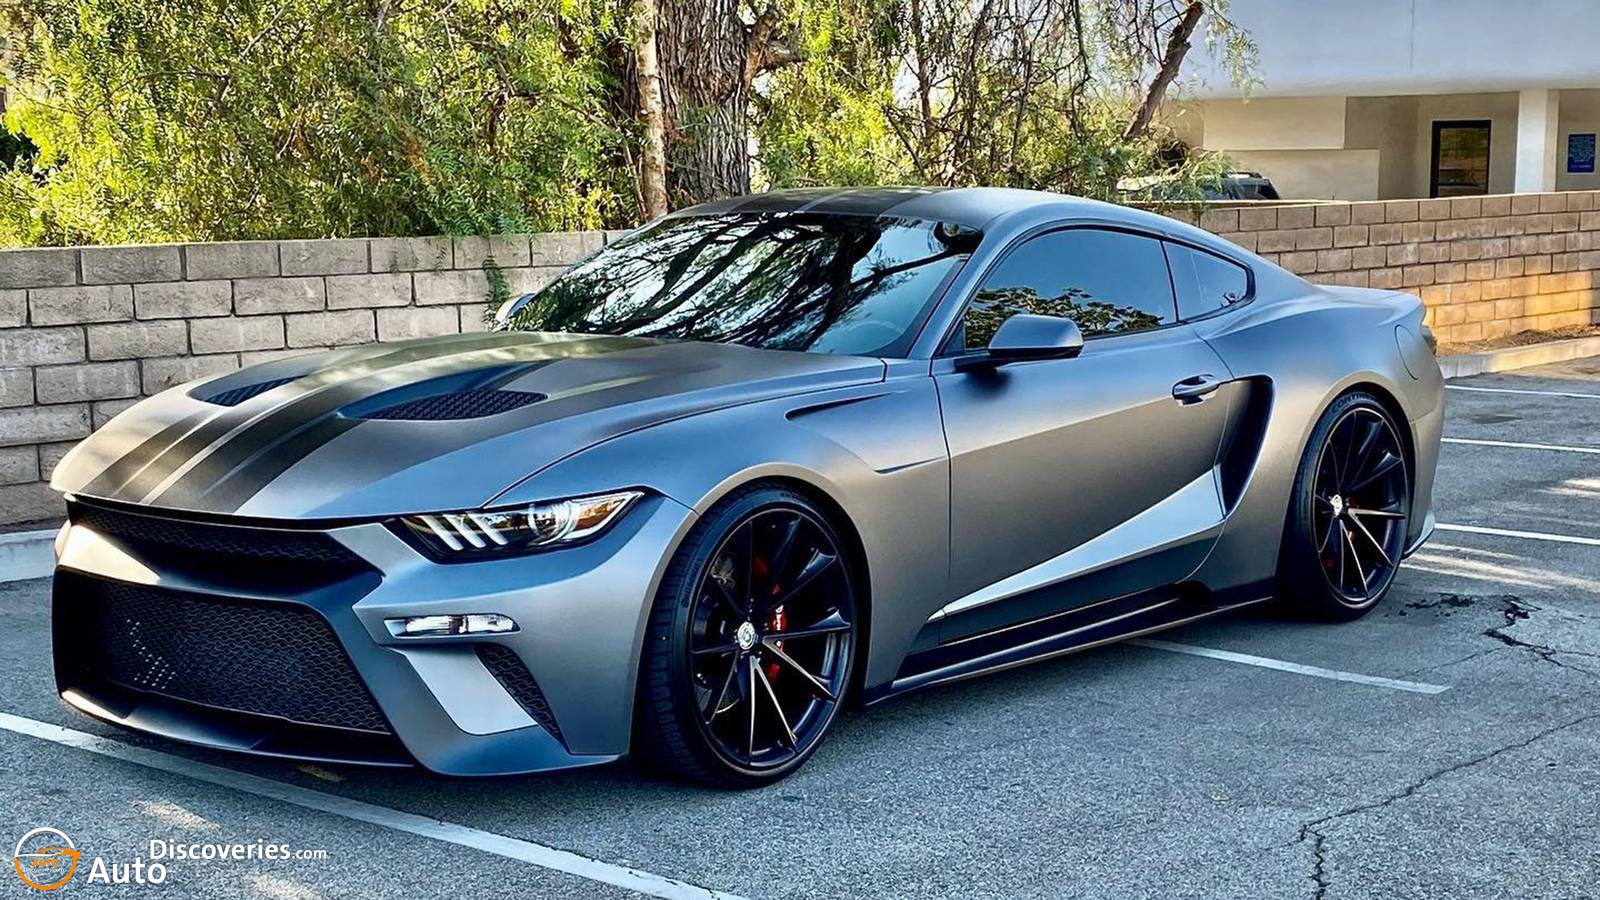 Meet The New Ford Mustang 2023! - Auto Discoveries